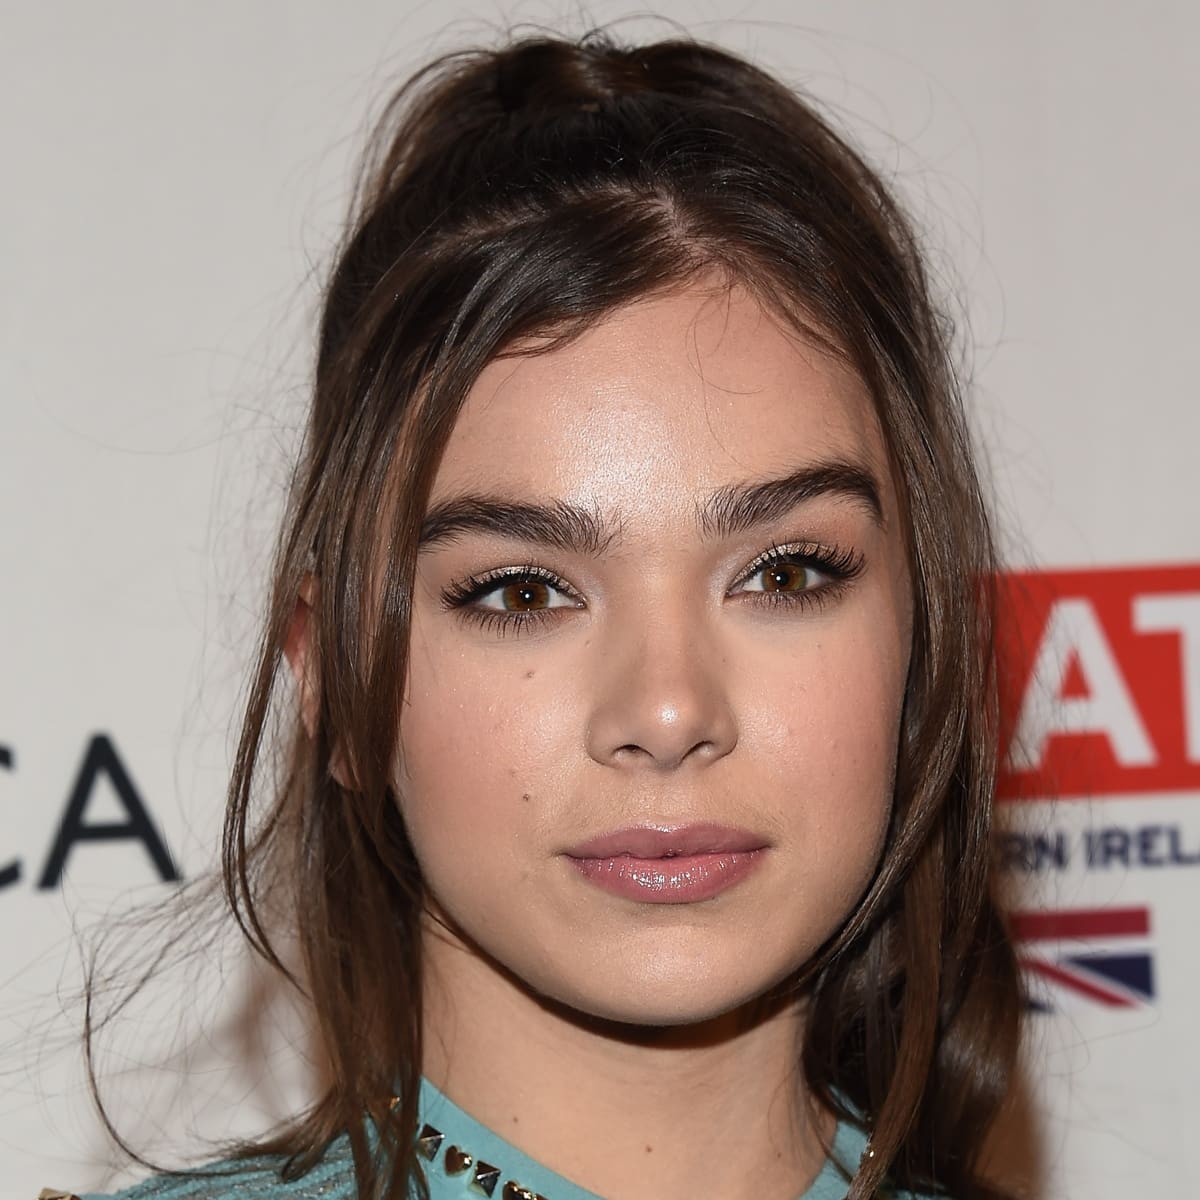 Hailee Steinfeld, known for her natural brown eye color, wore blue contacts to accurately portray Kate Bishop's distinct appearance in the Hawkeye series